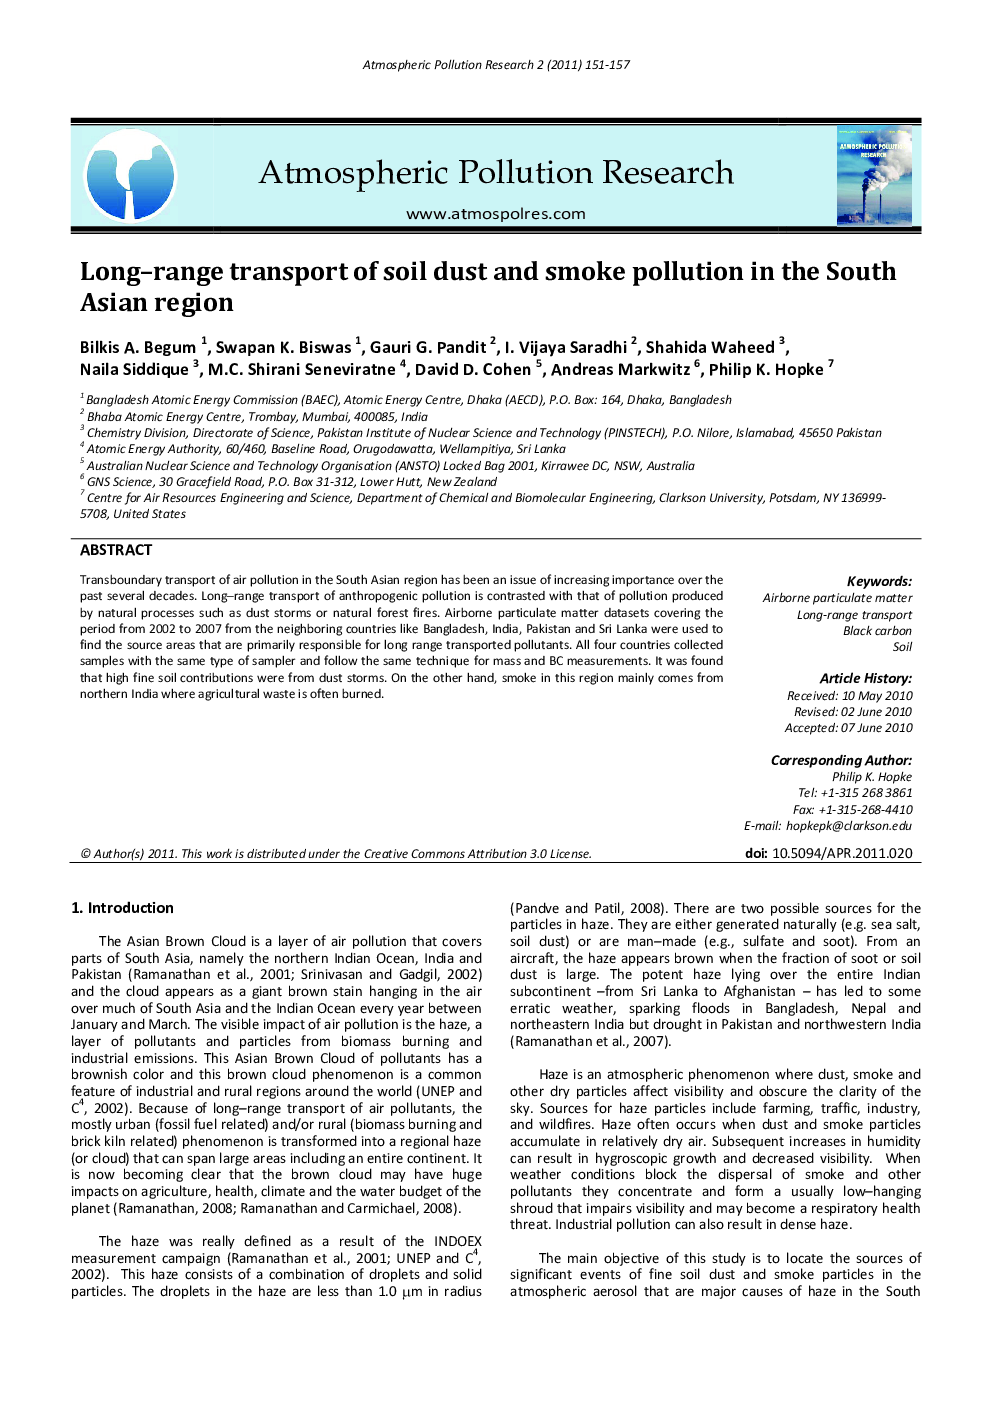 Long–range transport of soil dust and smoke pollution in the South Asian region